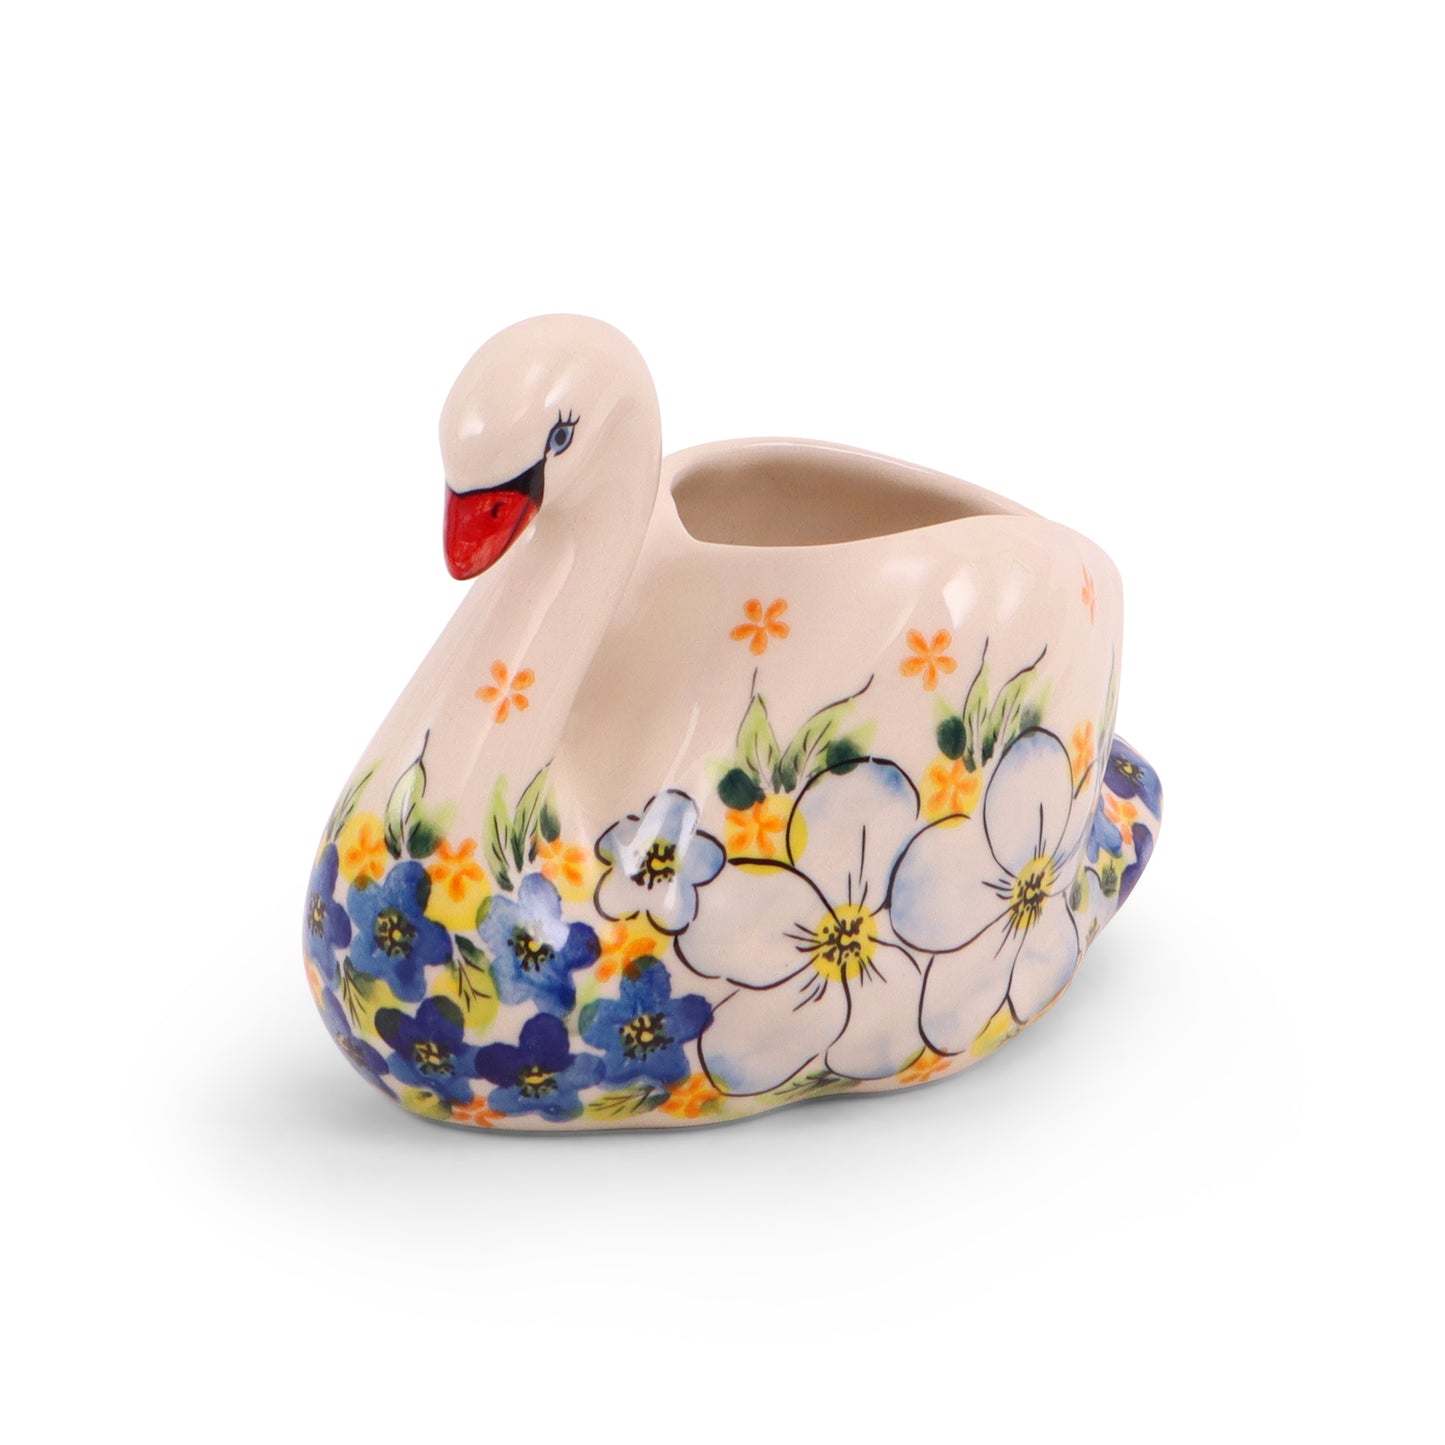 5"x3.5" Swan Container. Pattern: U88